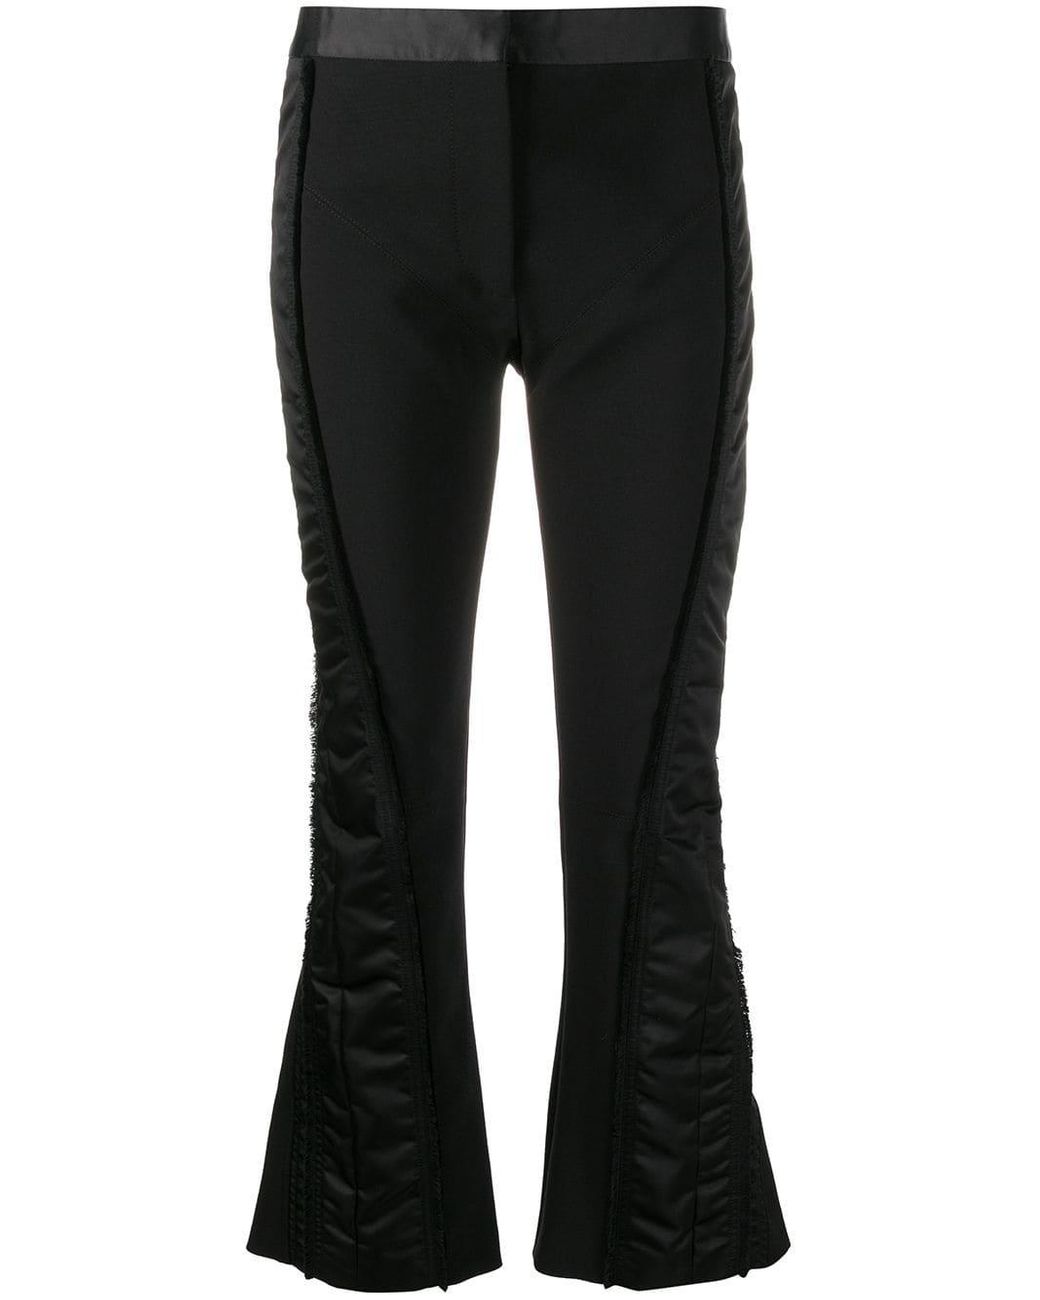 Mugler Synthetic Contrast Panel Trousers in Black - Lyst